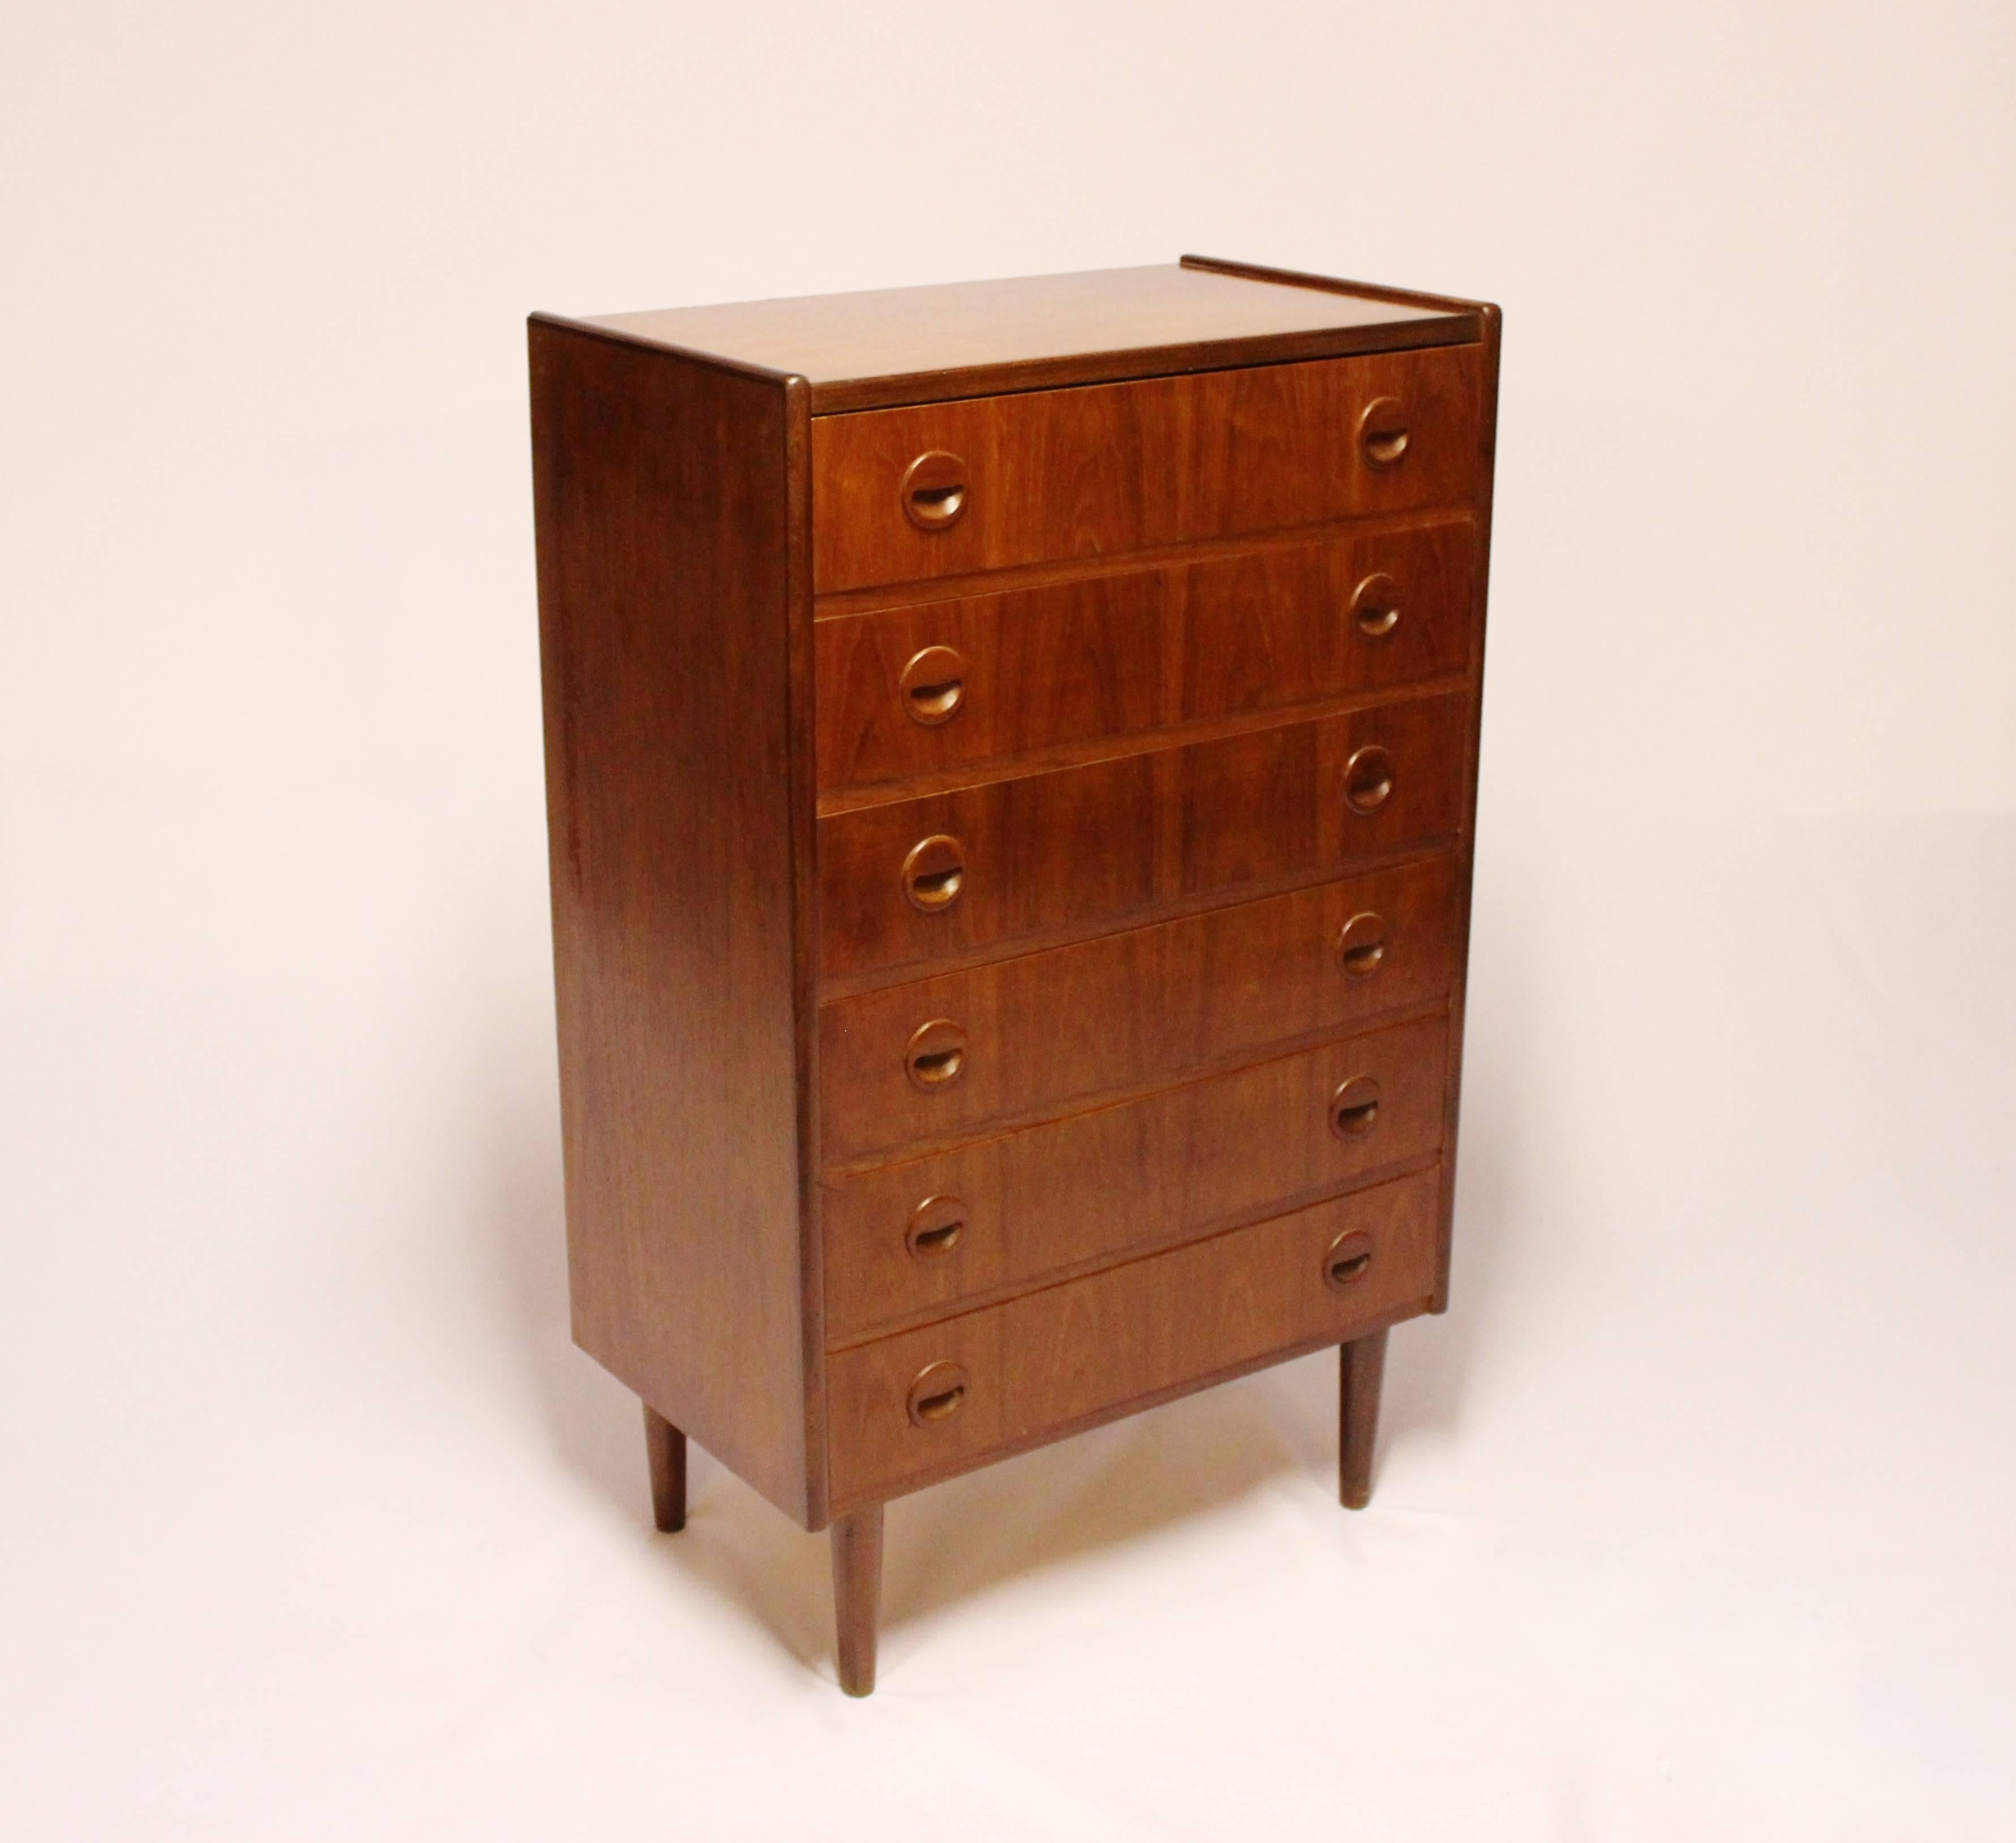 Chest with six drawers in teak designed by Kai Kristiansen and from the 1960s. The chest is in great vintage condition.